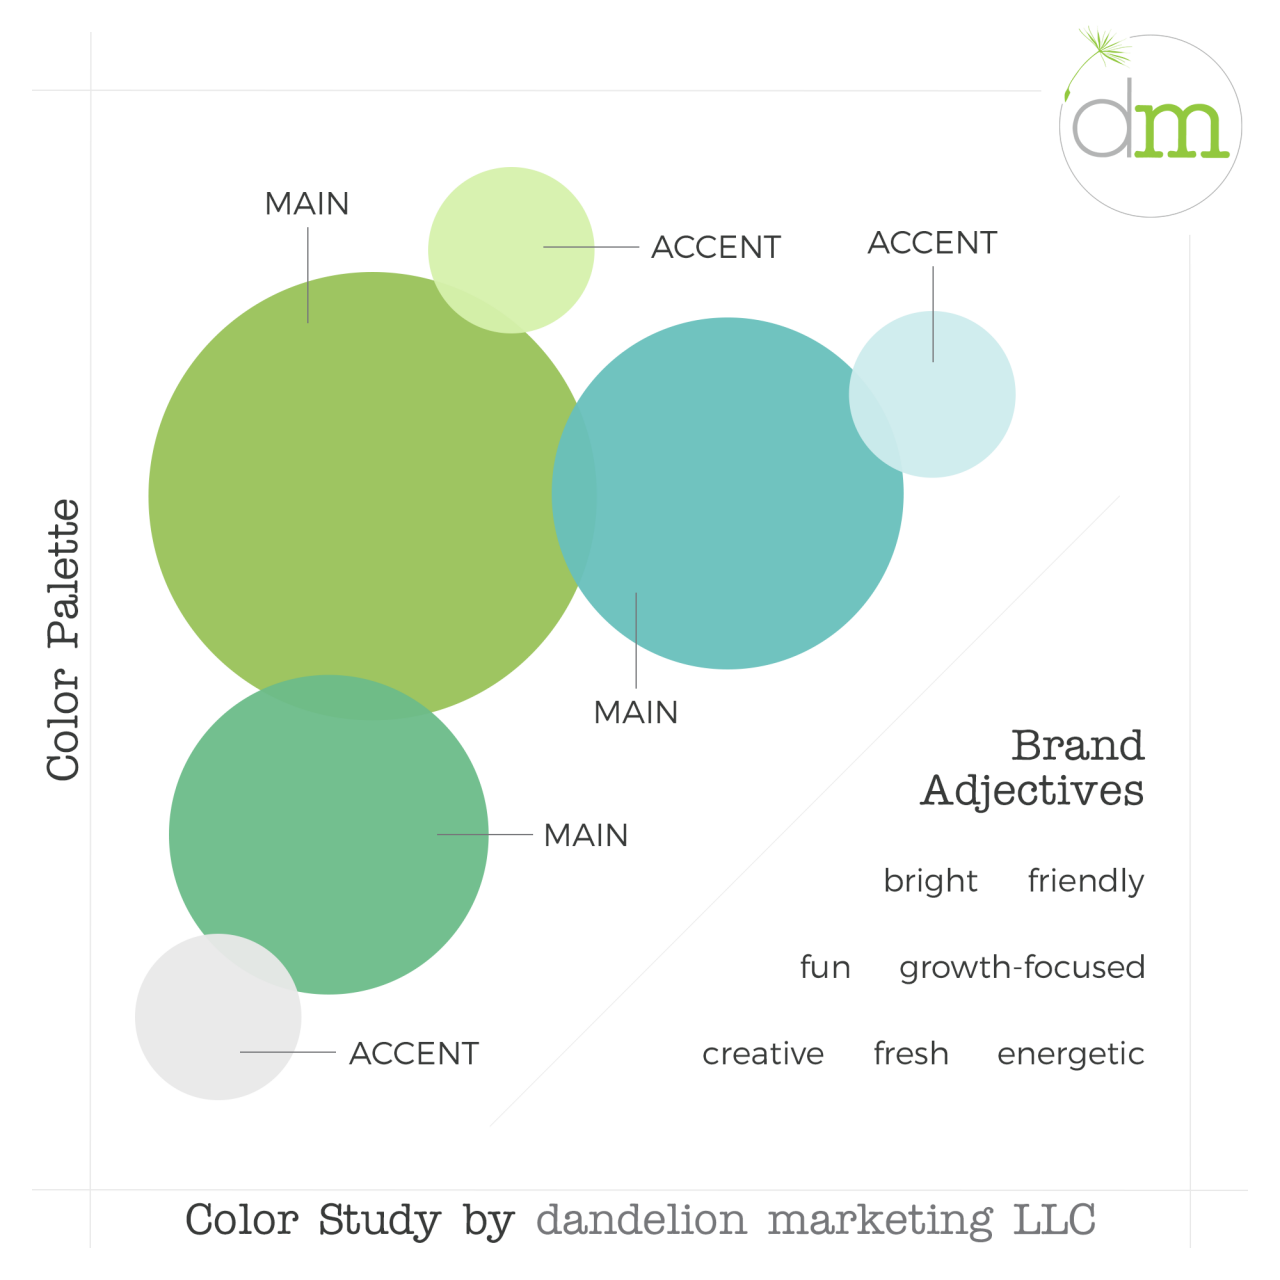 Choosing your brand colors – our brand’s color study